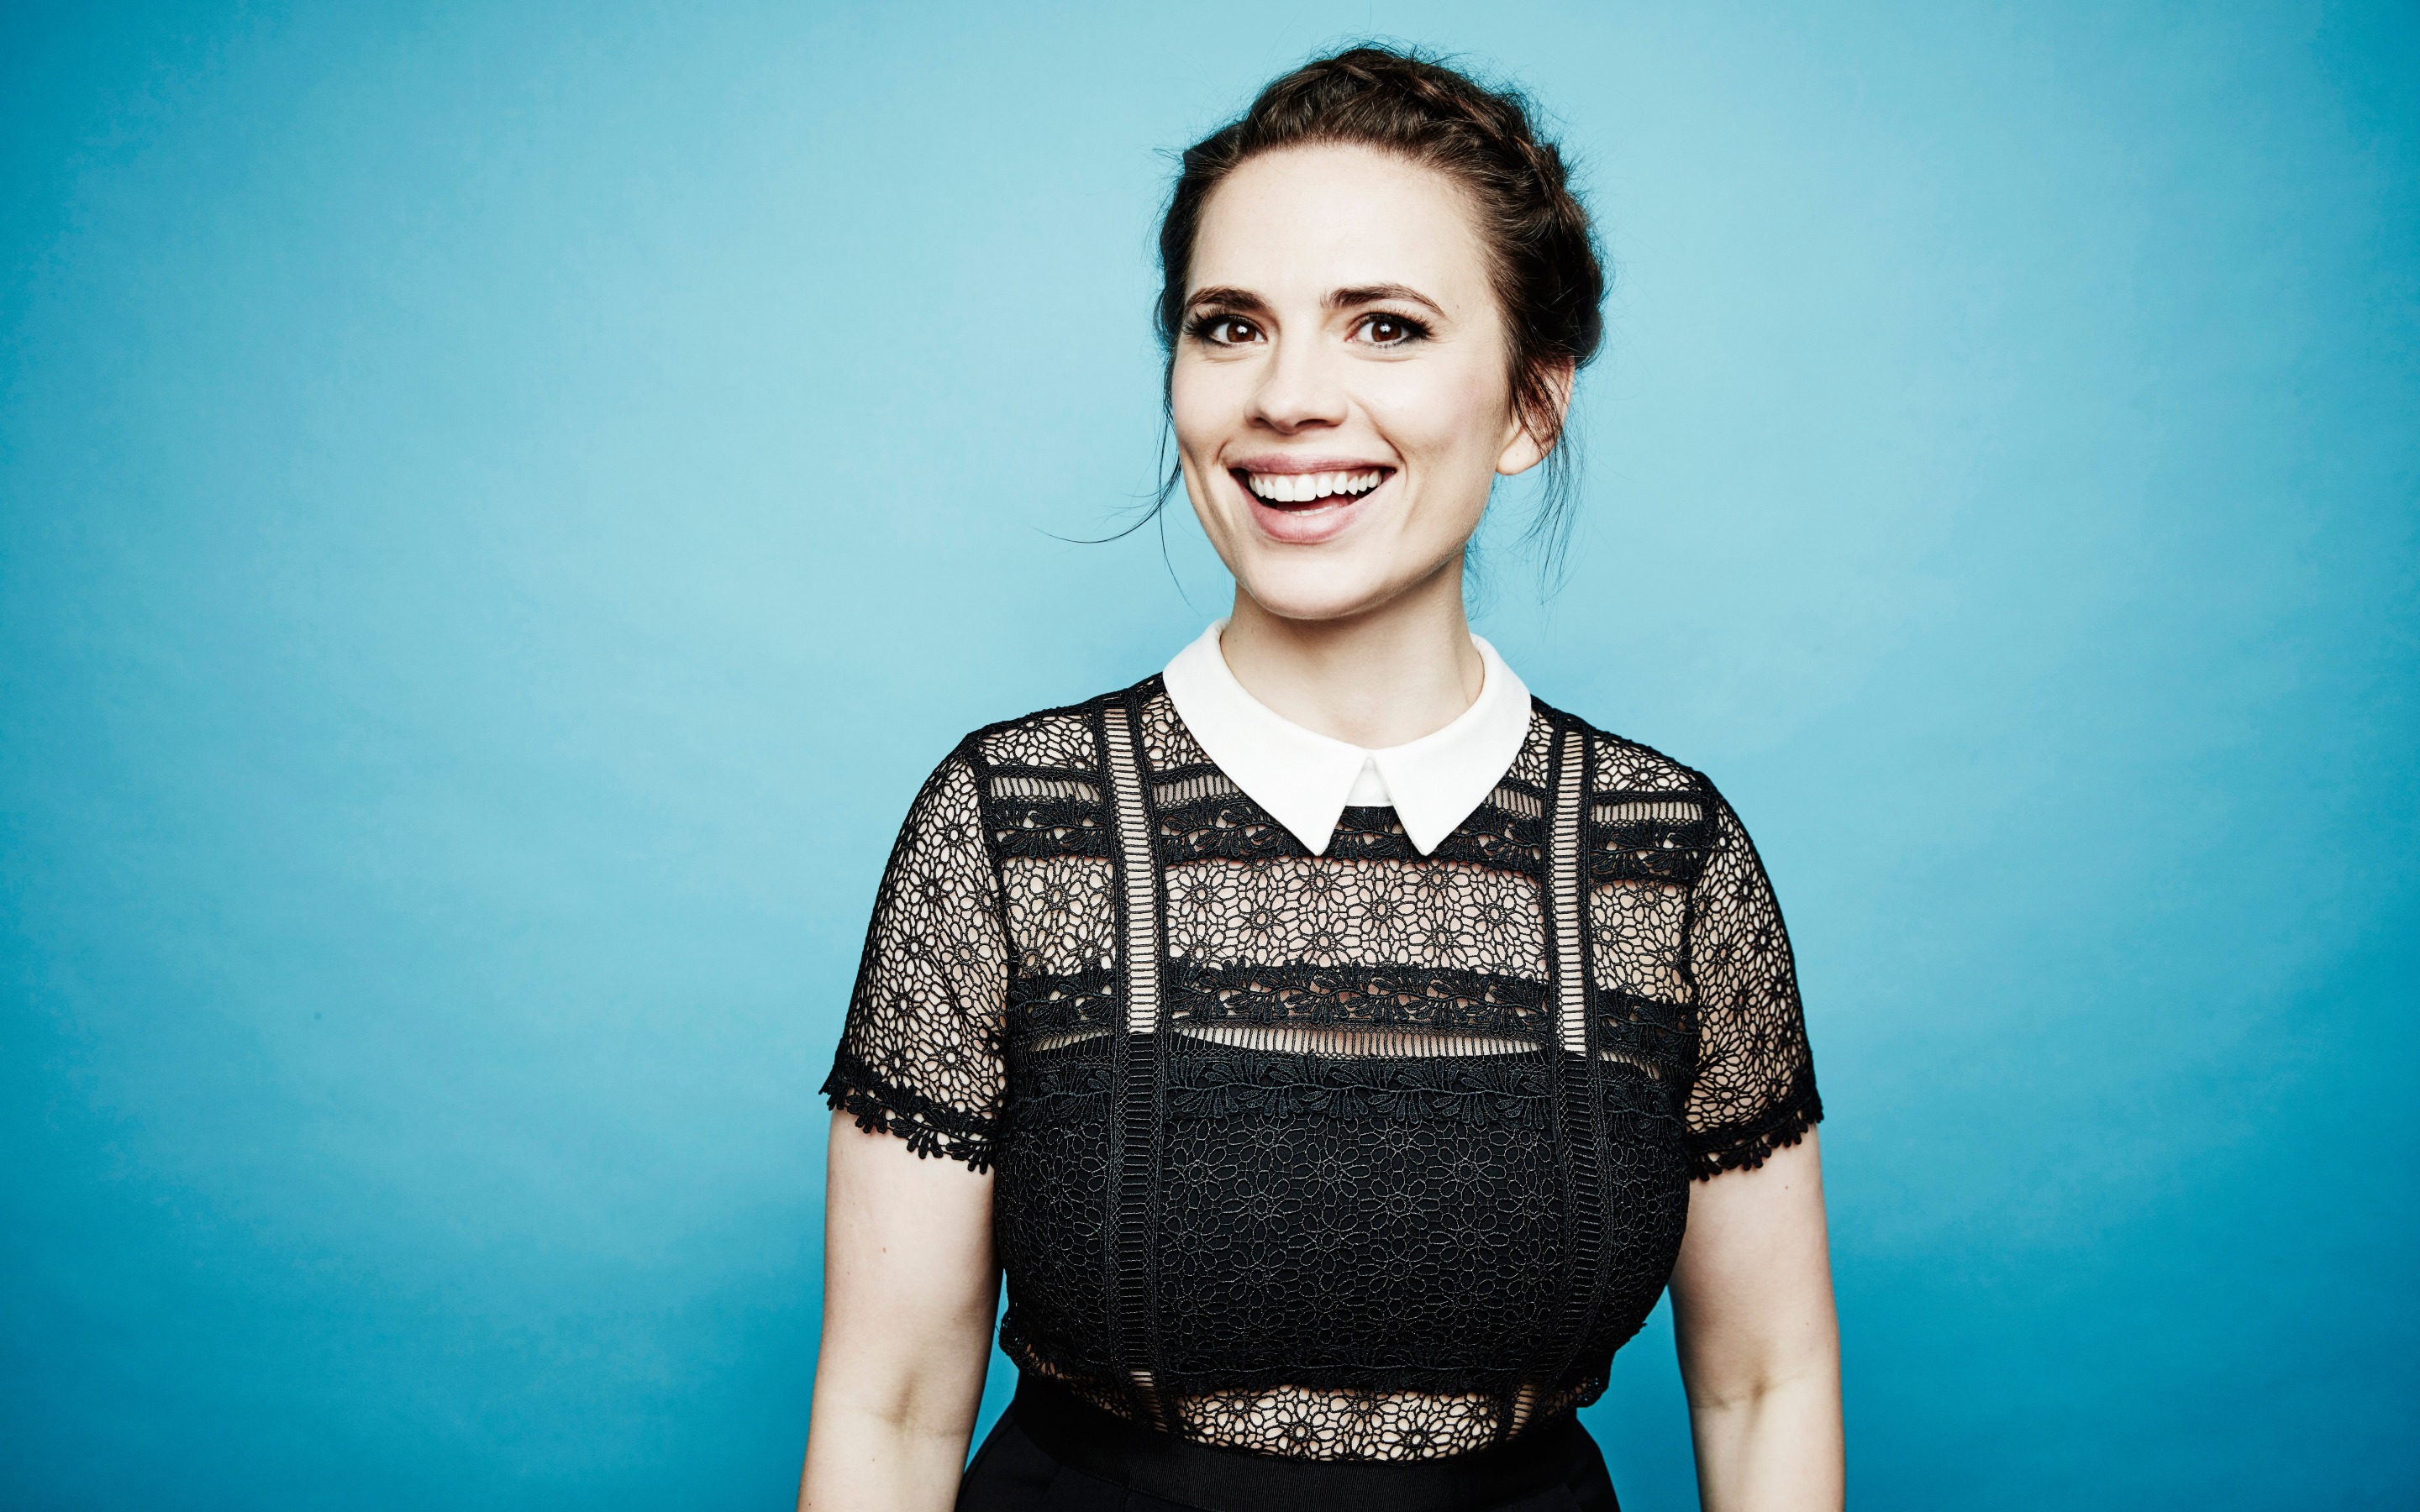 Hayley Atwell, Portrait, Smile, Black Dress, English - Jodie Whittaker Doctor Who Best - HD Wallpaper 